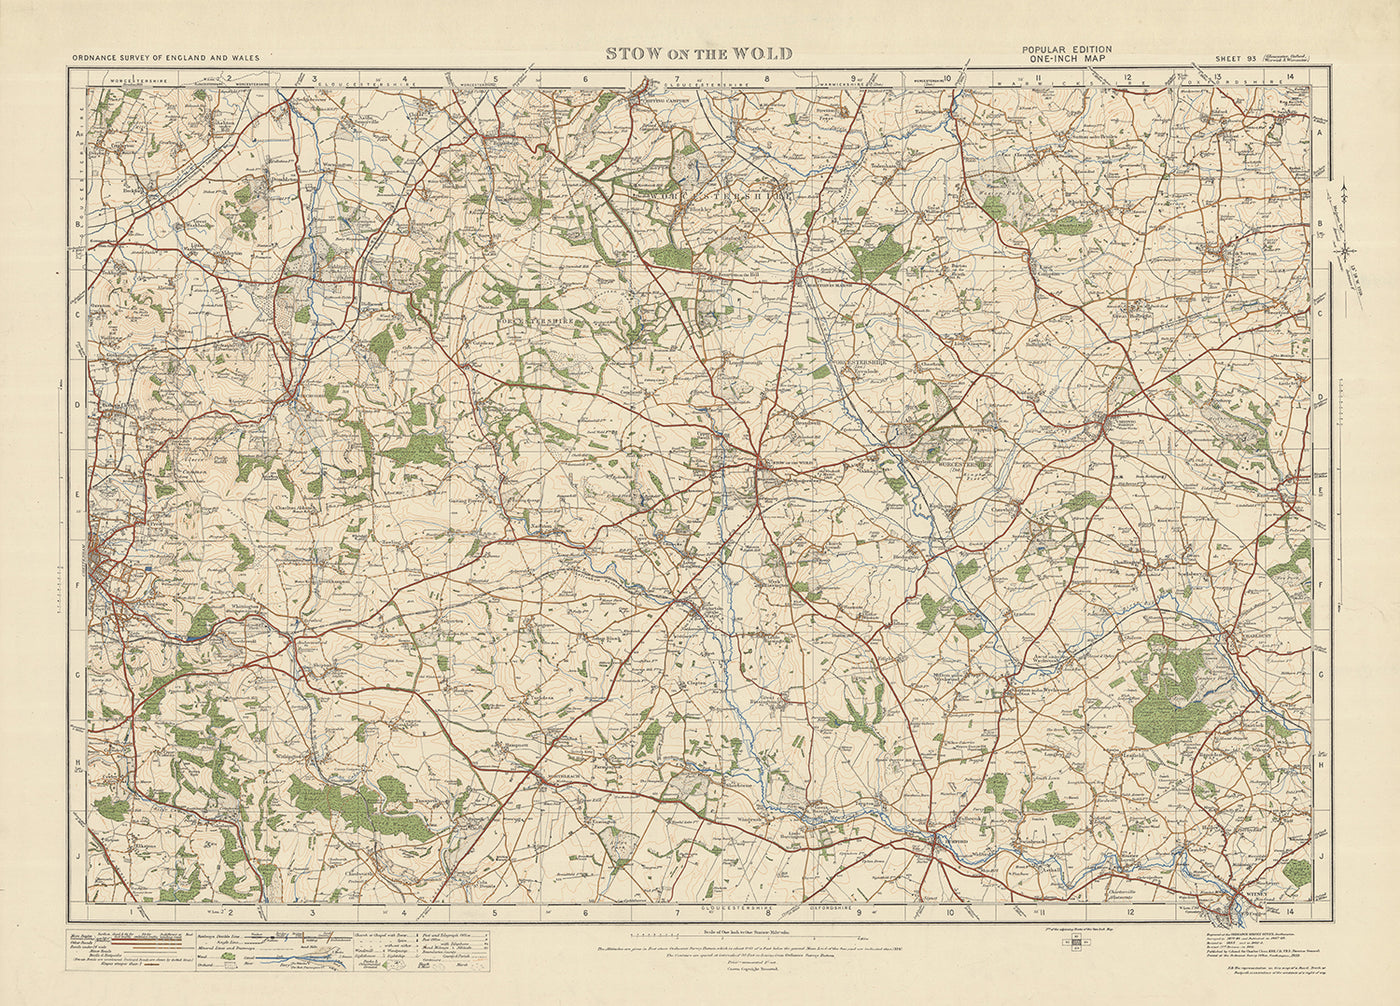 Carte Old Ordnance Survey, feuille 93 - Stow on the Wold, 1925 : Moreton-in-Marsh, Chipping Norton, Bourton-on-the-Water, Witney, Cotswolds AONB